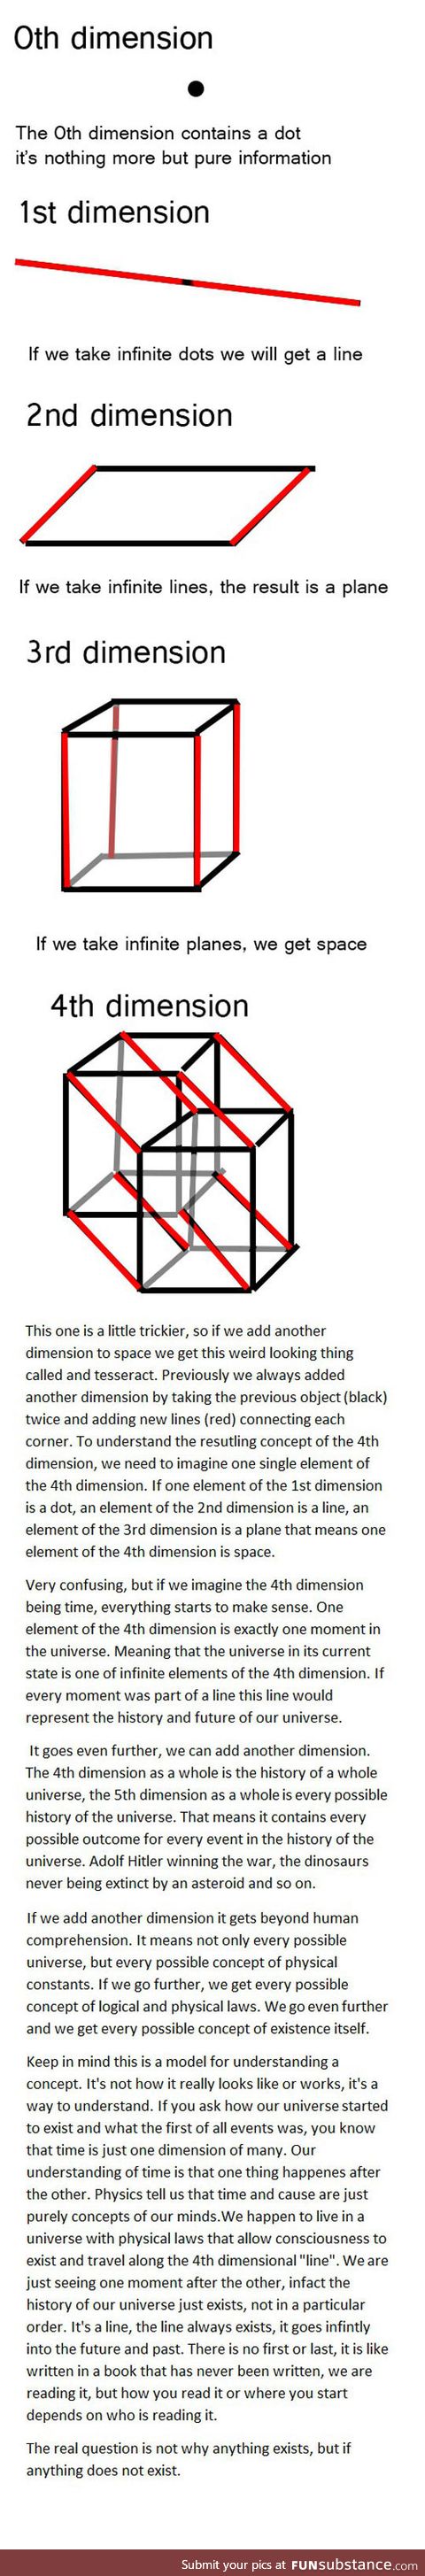 An easy way to understand dimensions